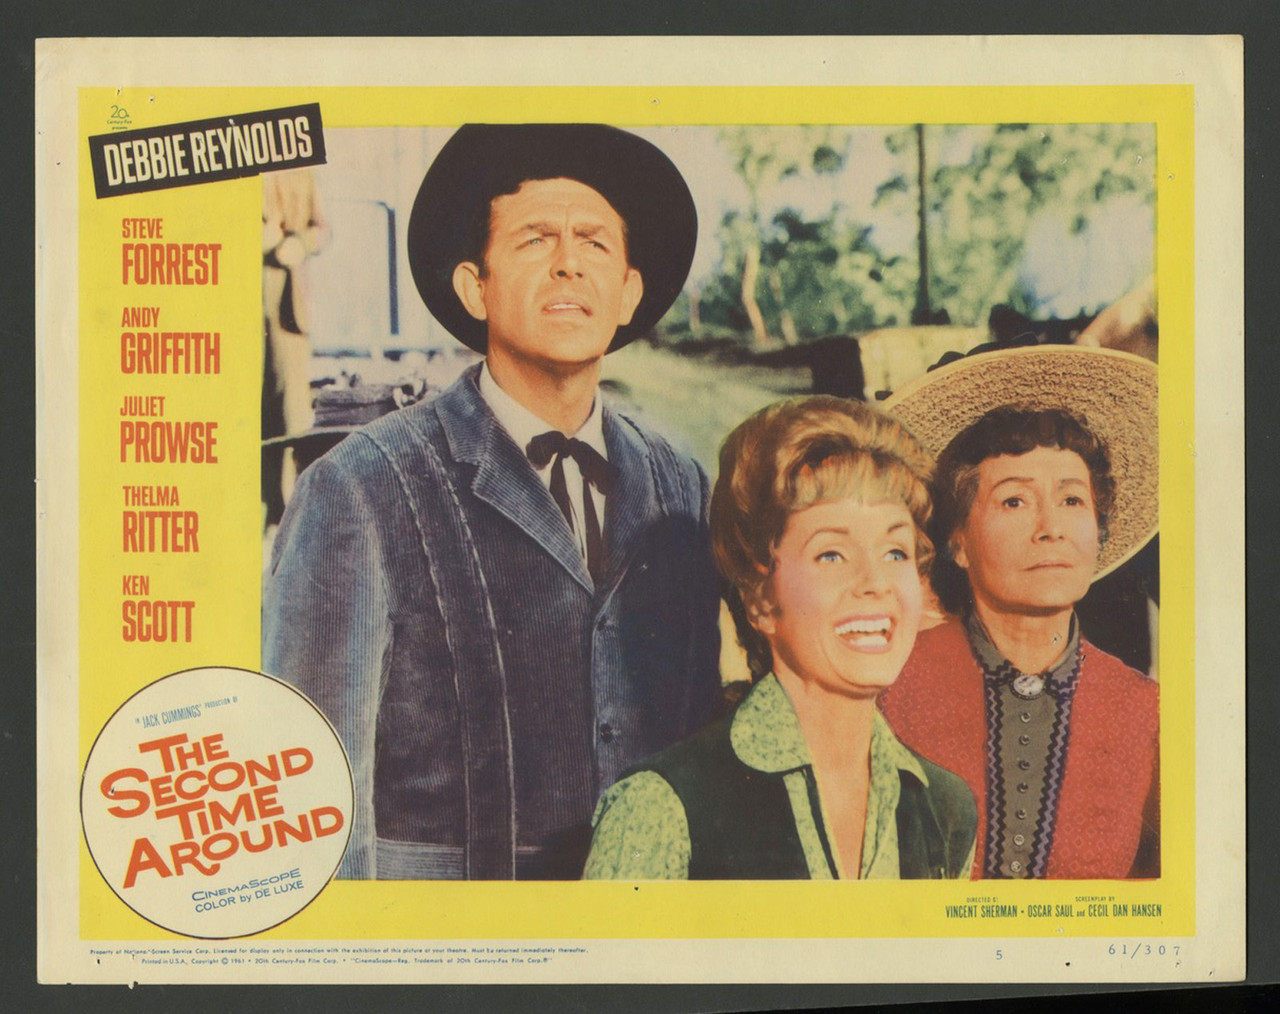 Original Second Time Around, The (1961) movie poster in C8 condition for  $35.00